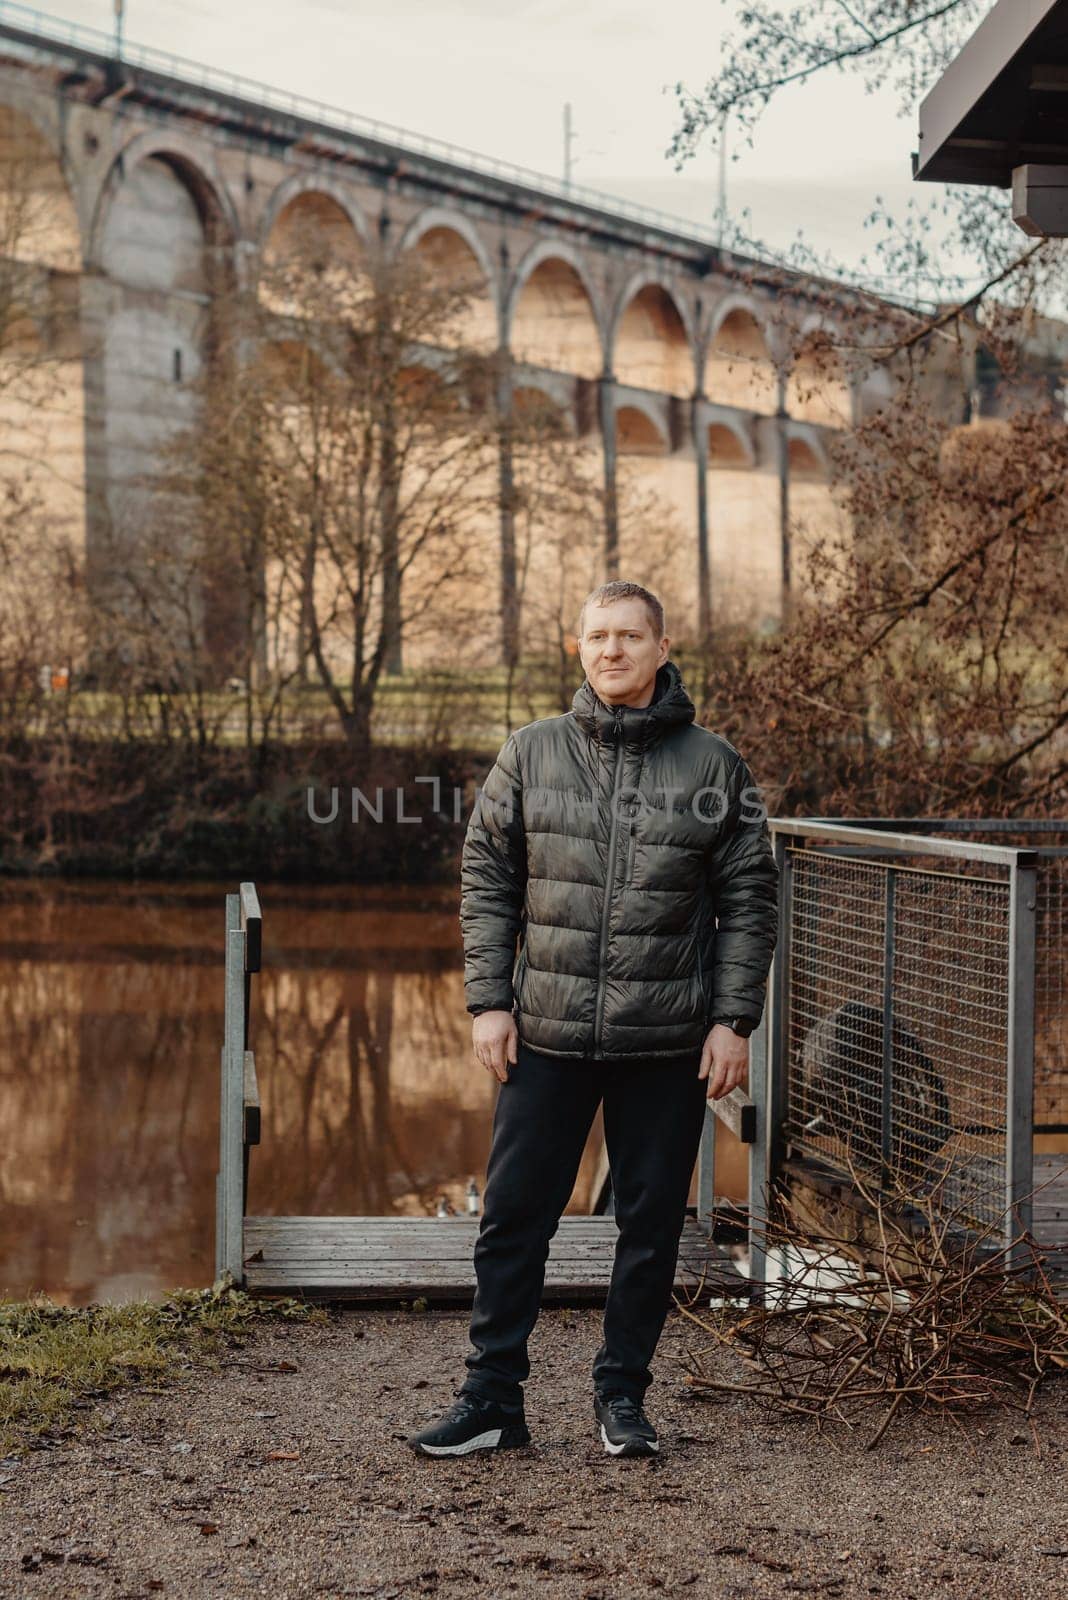 Timeless Elegance: 40-Year-Old Man in Stylish Jacket by Neckar River and Historic Bridge in Bietigheim-Bissingen, Germany by Andrii_Ko